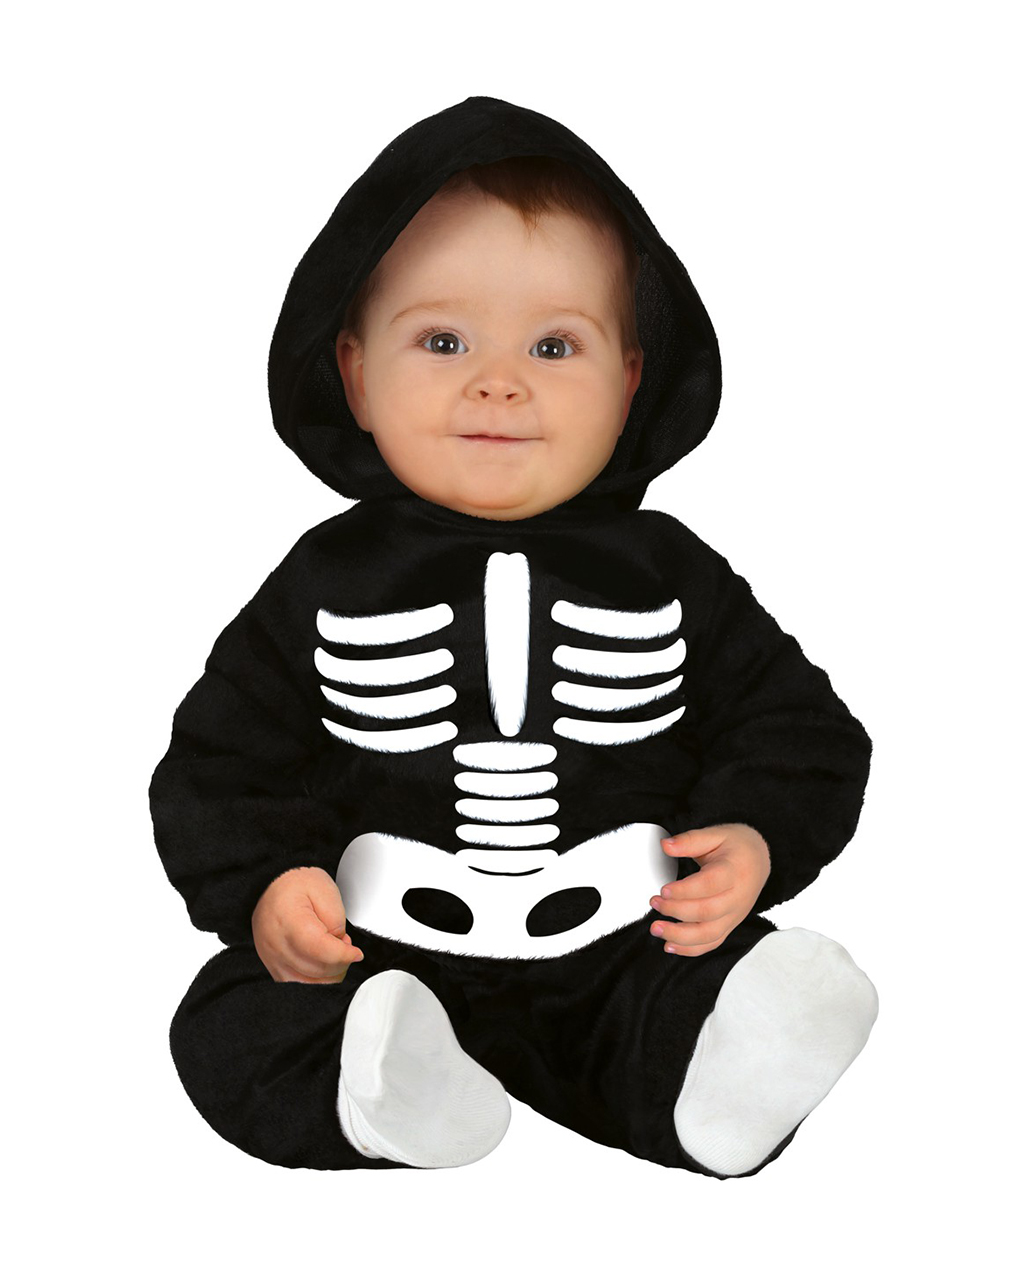 Skeleton Plush Costume With Hood For Toddlers | Horror-Shop.com